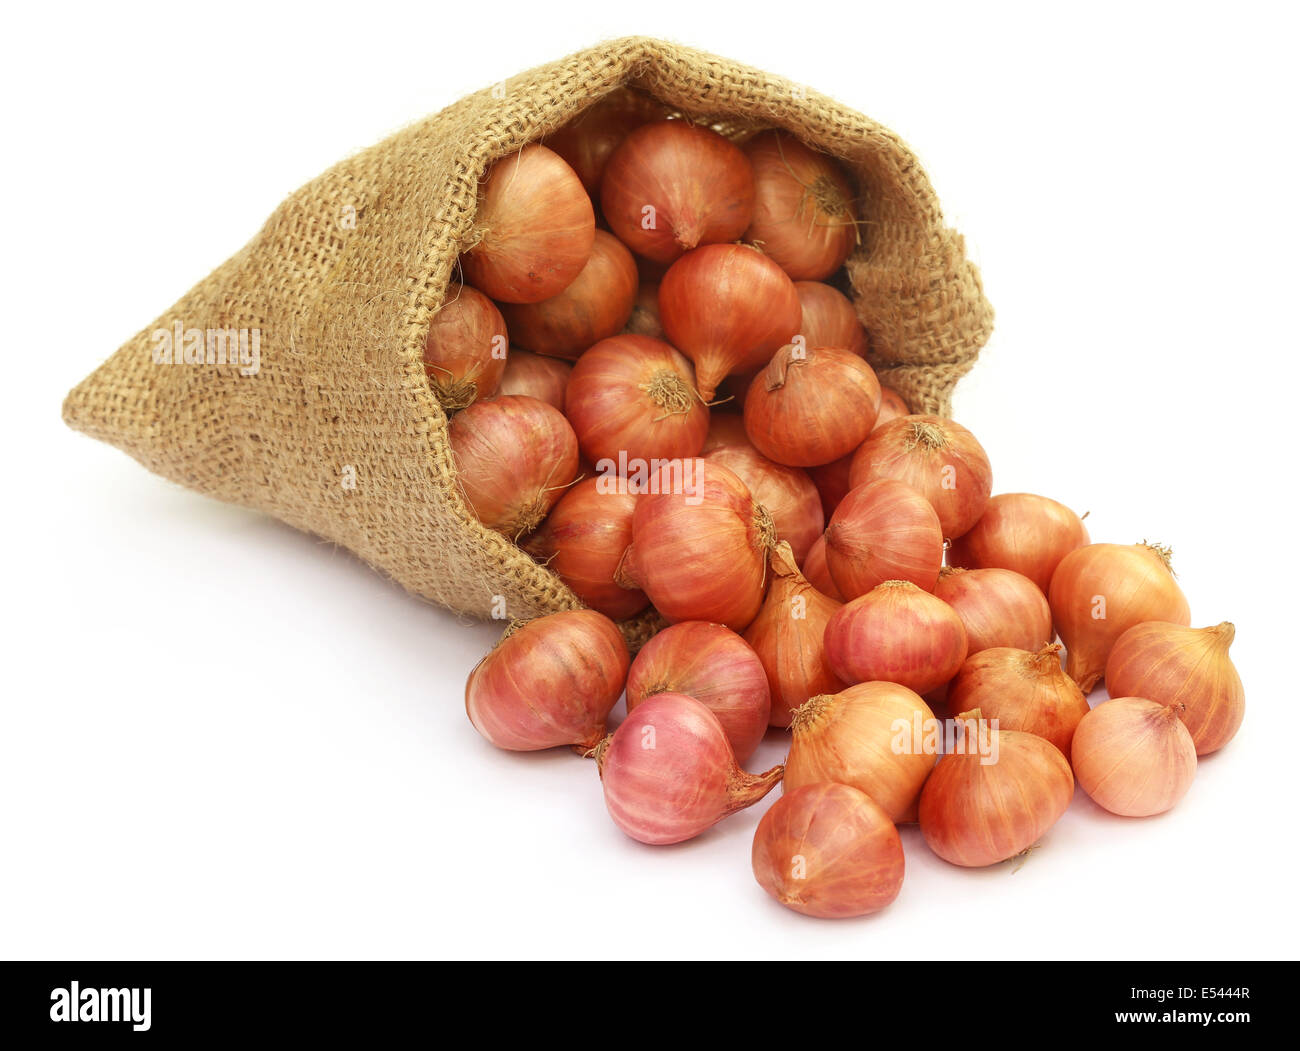 Sack with onion over white background Stock Photo